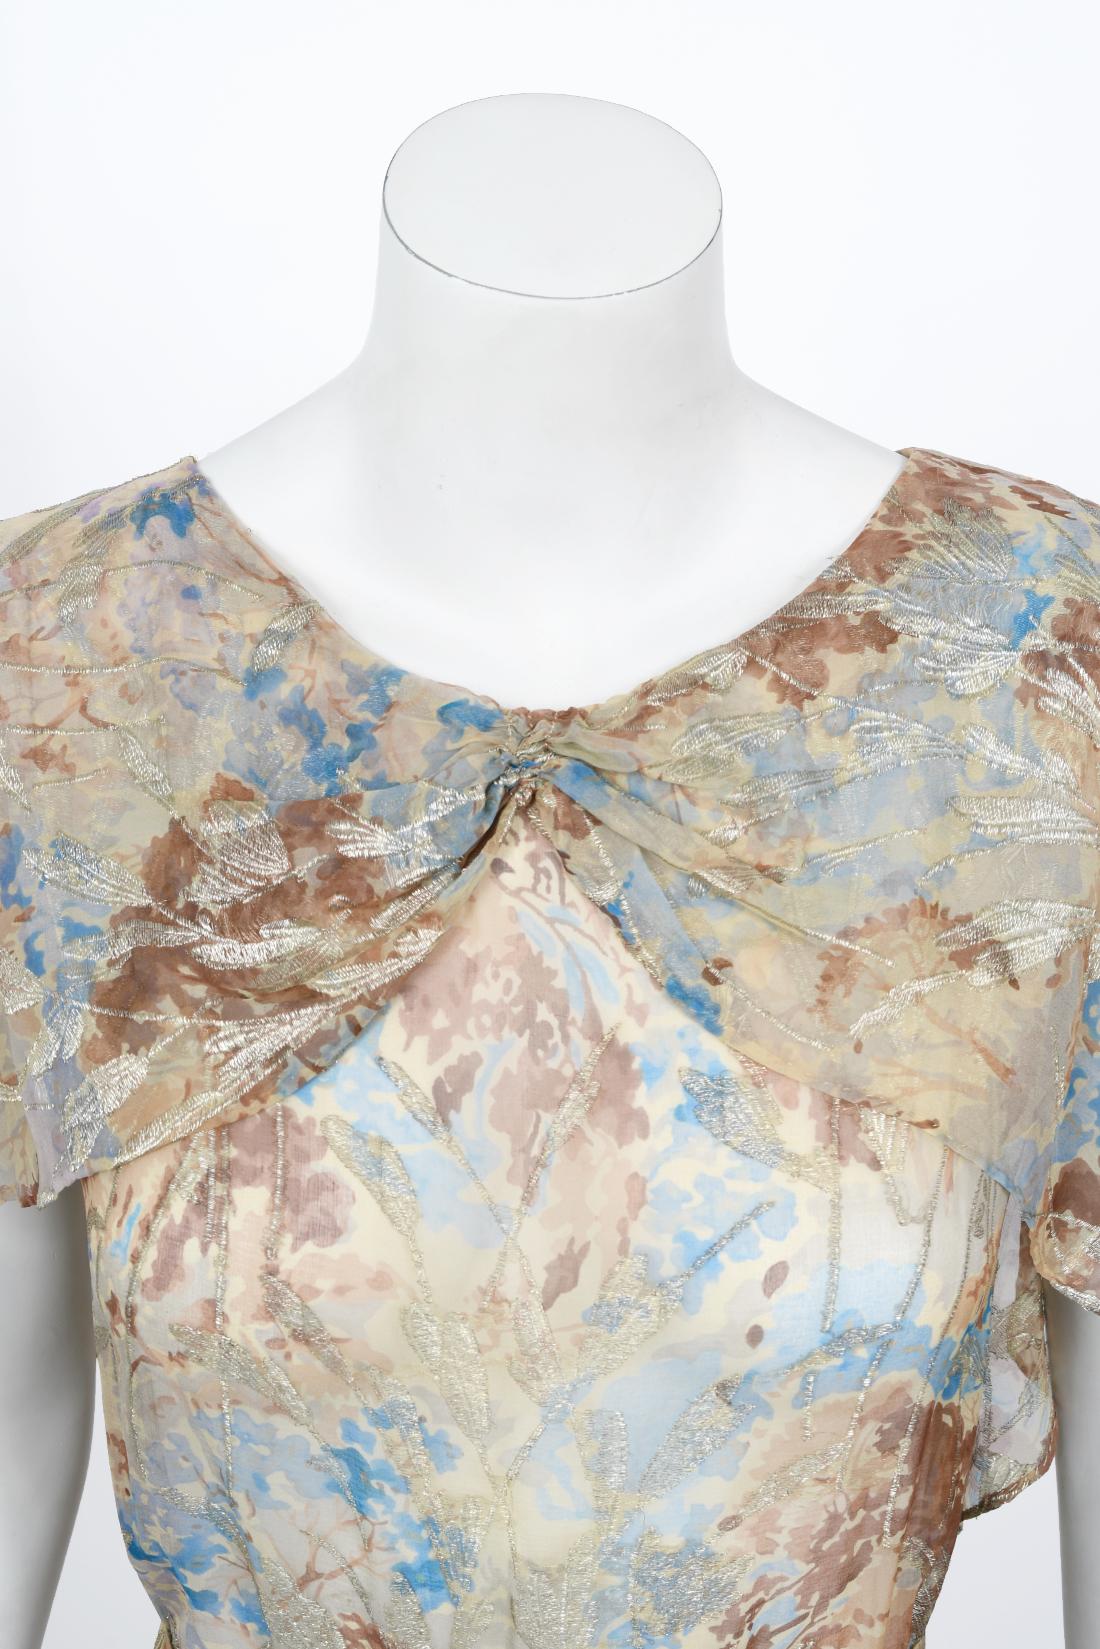 Vintage 1930's Metallic Floral Semi-Sheer Lamé Silk Capelet Drape Belted Gown In Good Condition For Sale In Beverly Hills, CA